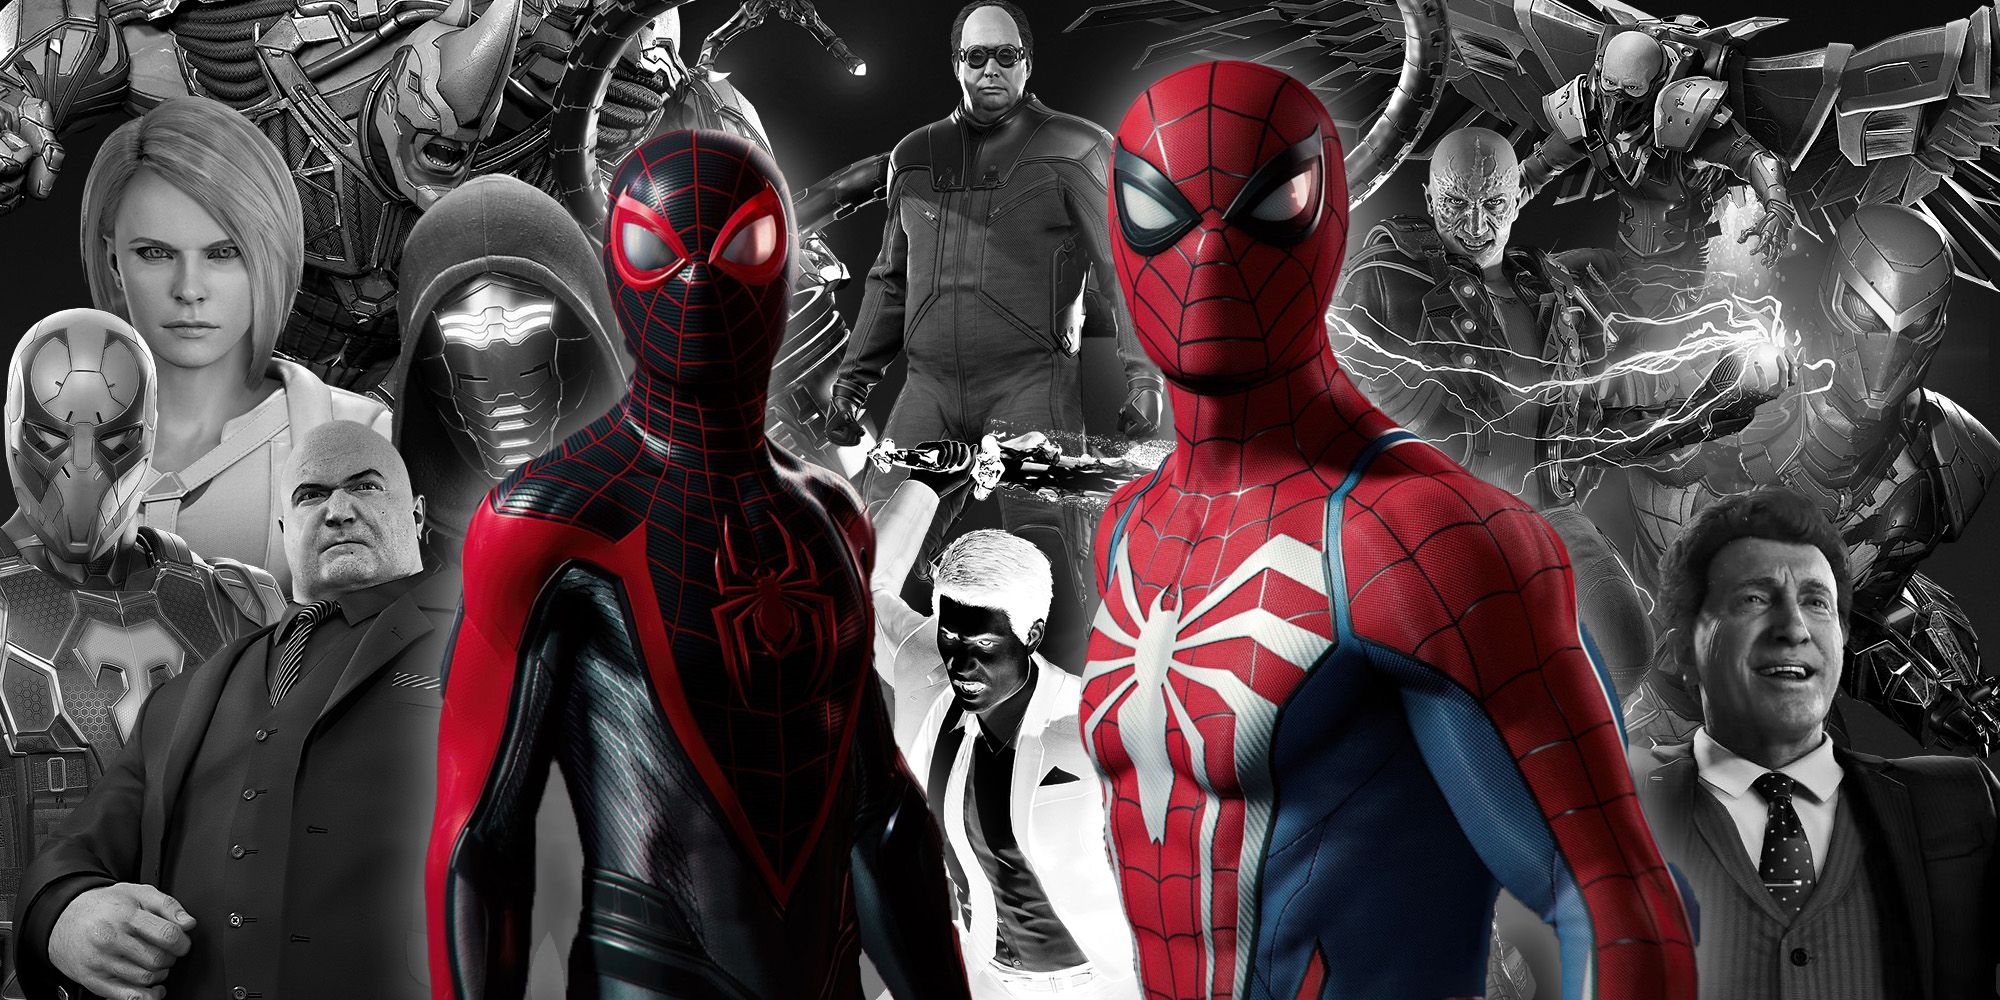 Marvel's Spider-Man 2: Peter Parker and Miles Morales in color surrounded by various supervillains in black and white